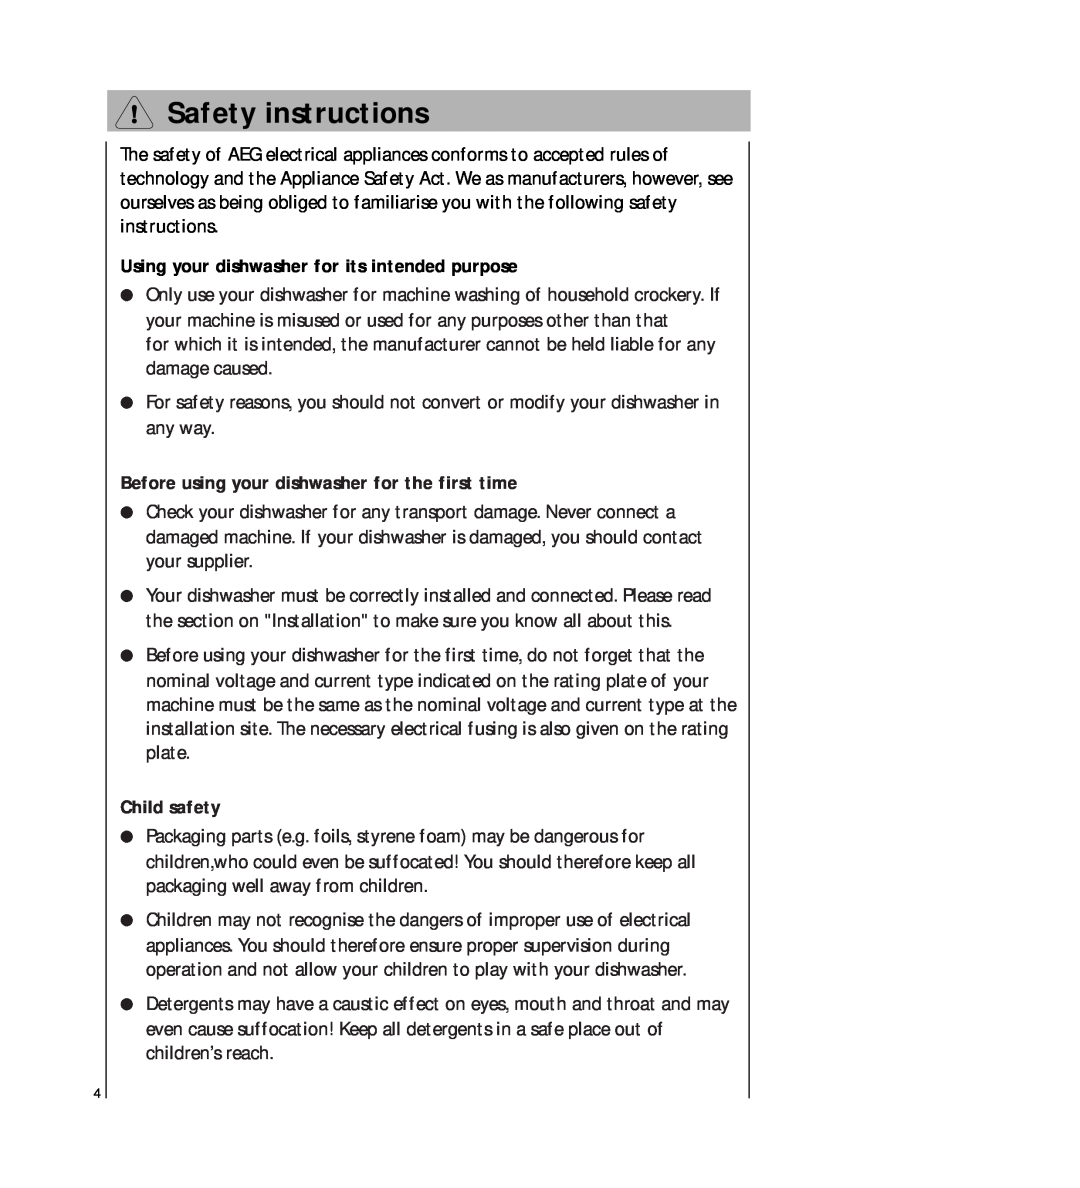 AEG 2807 manual Safety instructions, Using your dishwasher for its intended purpose, Child safety 